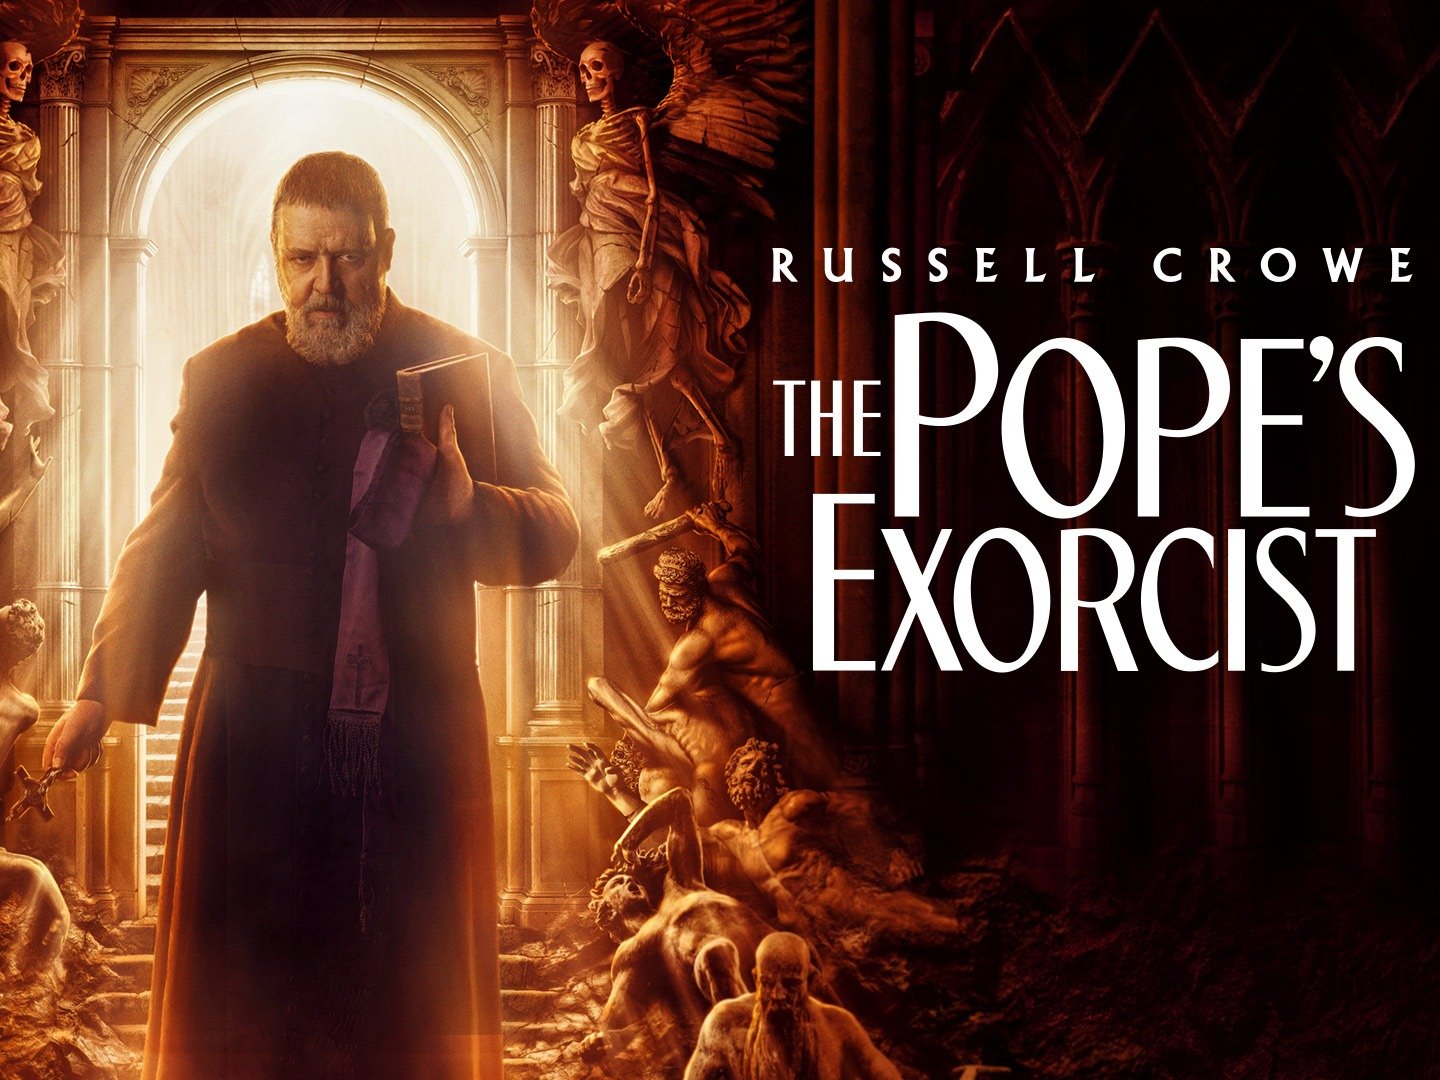 The Pope's Exorcist Trailer 1 Trailers & Videos Rotten Tomatoes